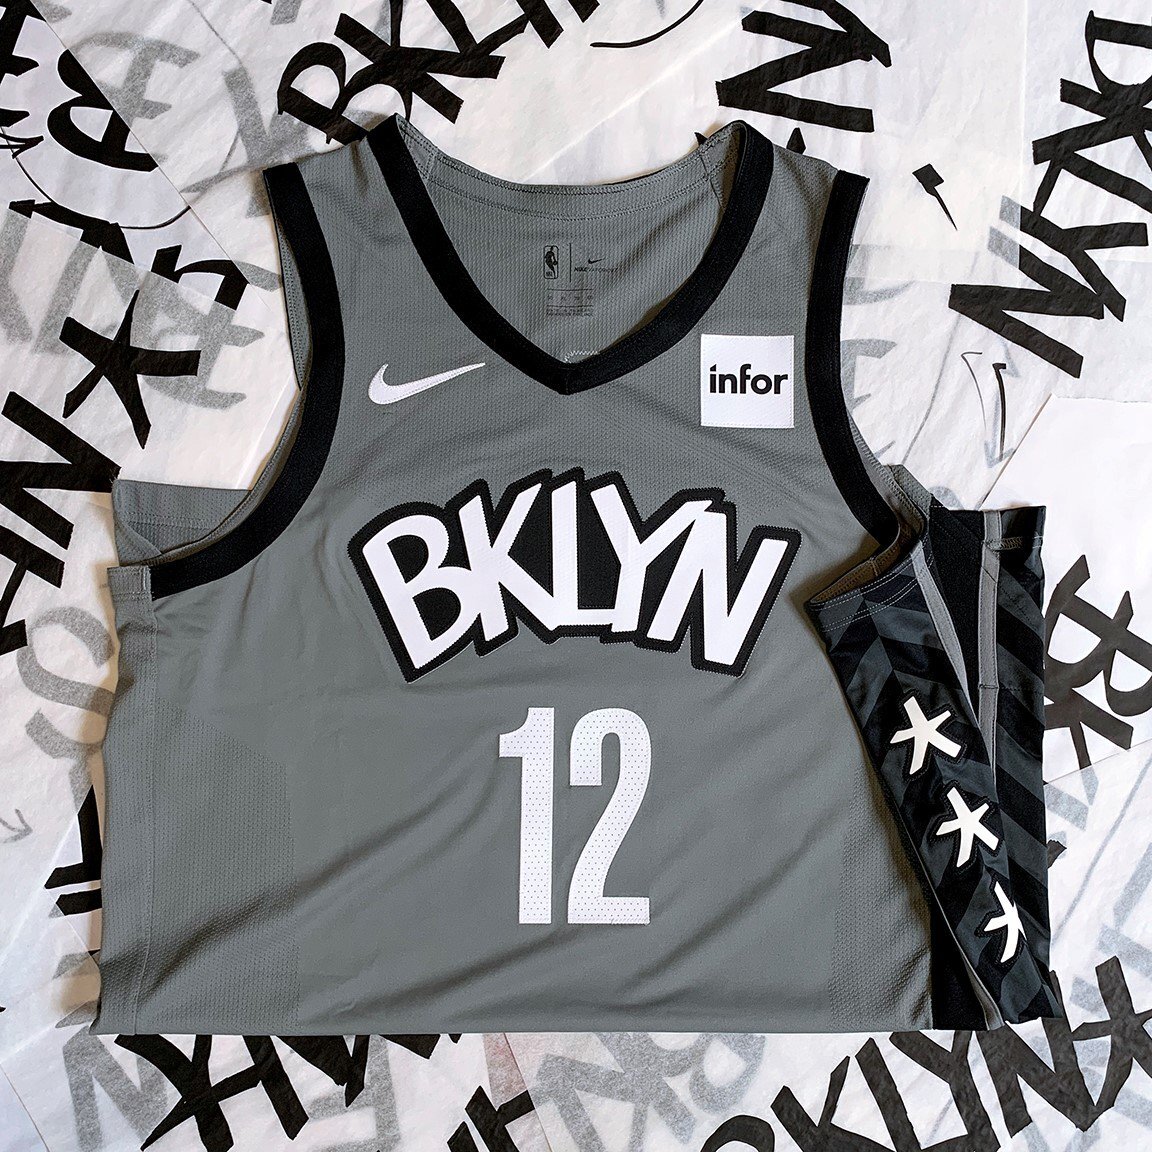 Brooklyn Nets unveil new grey court design for upcoming 2019-20 season 